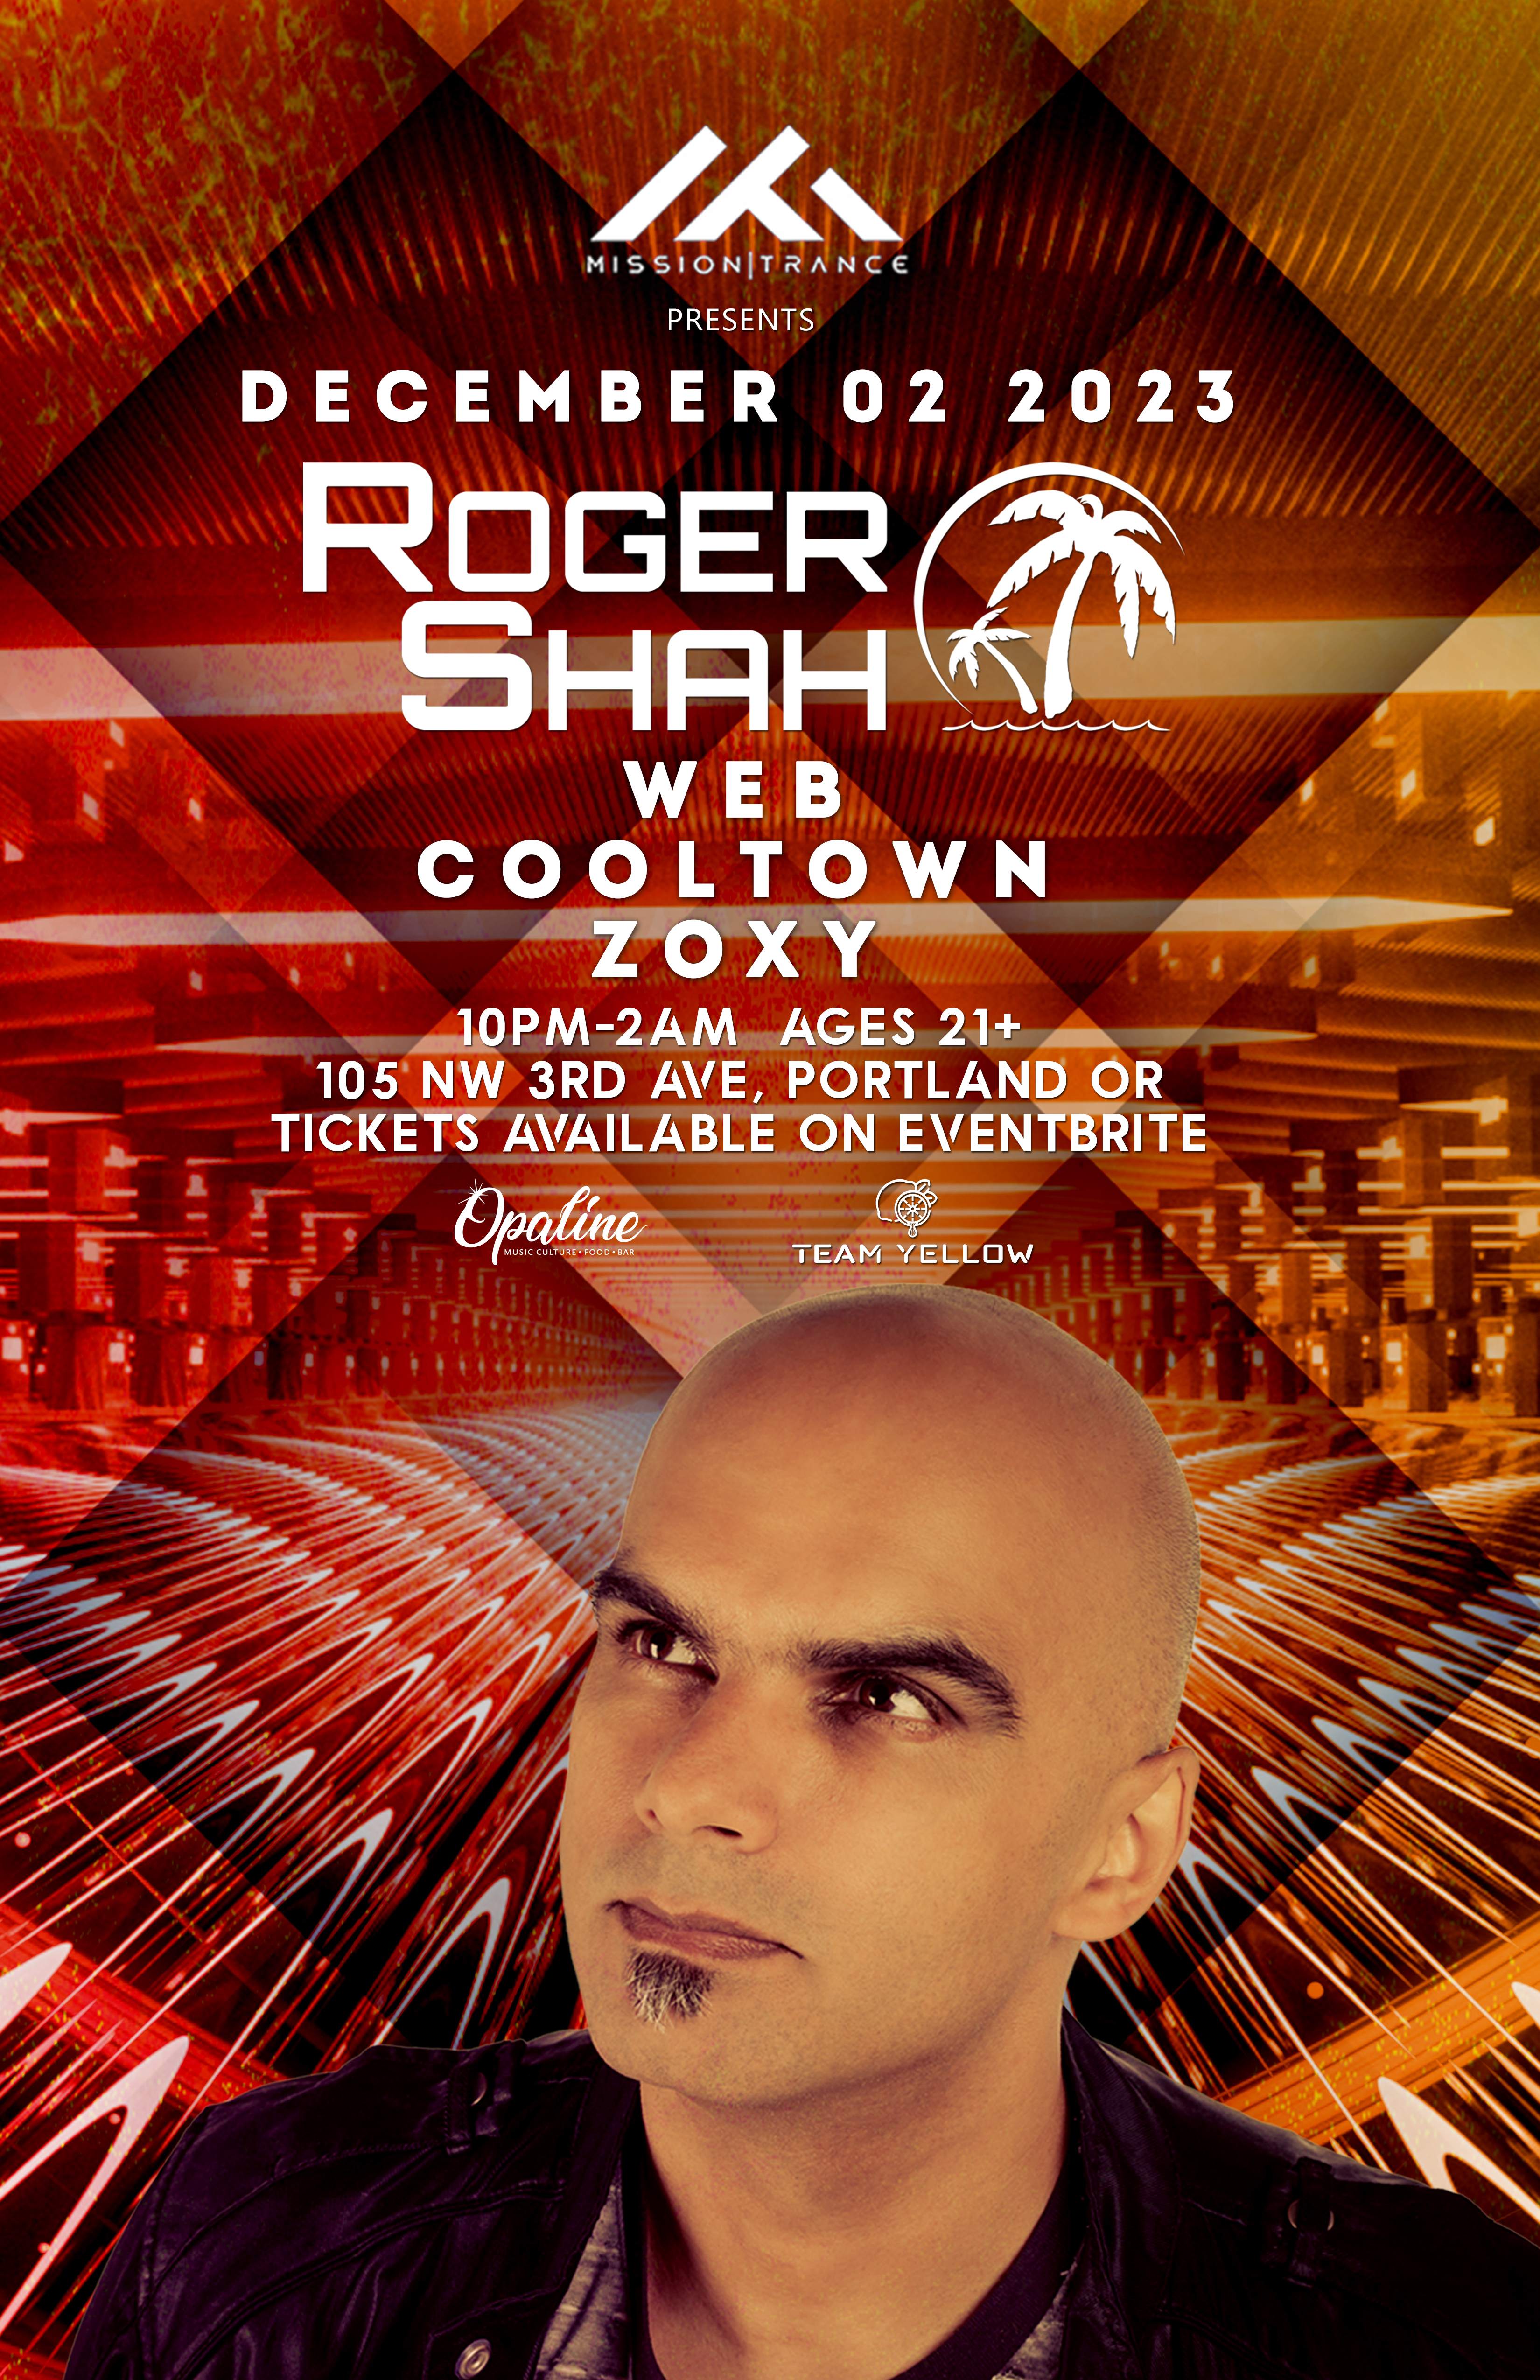 Mission Trance presents: Roger Shah (Feat. Cooltown) - Página frontal